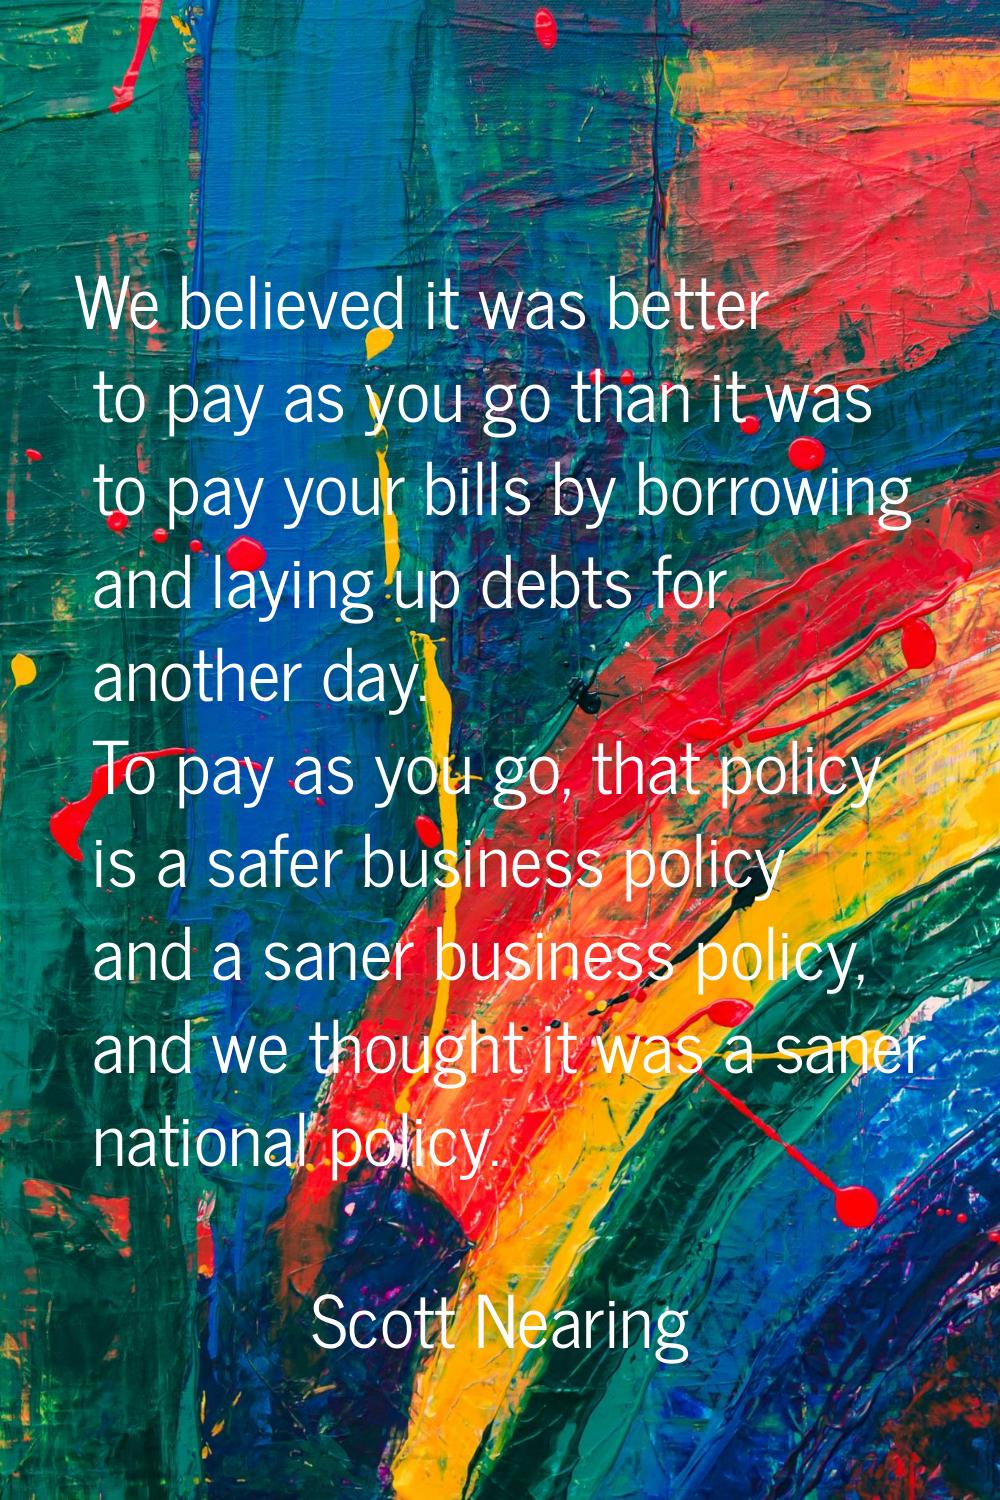 We believed it was better to pay as you go than it was to pay your bills by borrowing and laying up